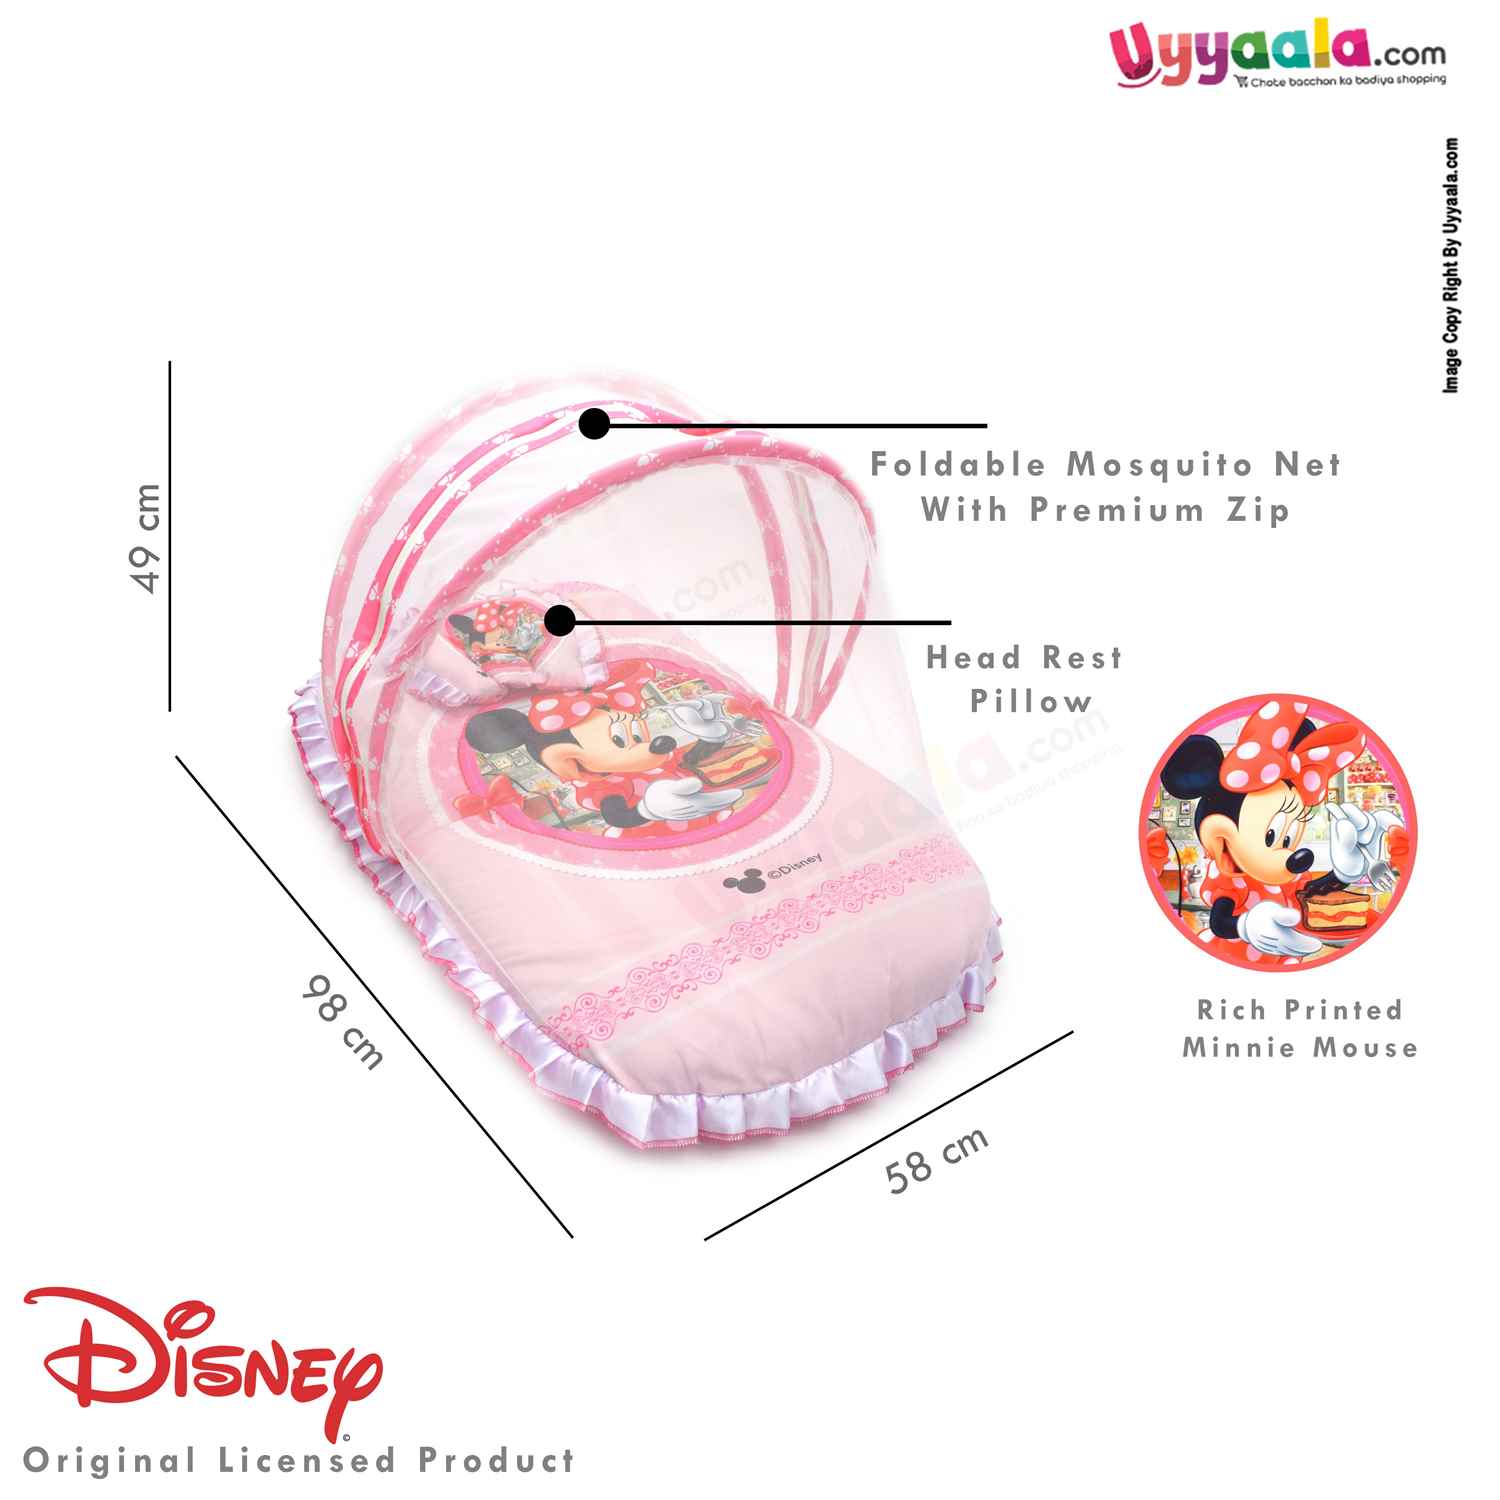 DISNEY Baby Bedding Set with Protection Net & Pillow Cotton, Minnie Mouse Print 0+m Age - Pink